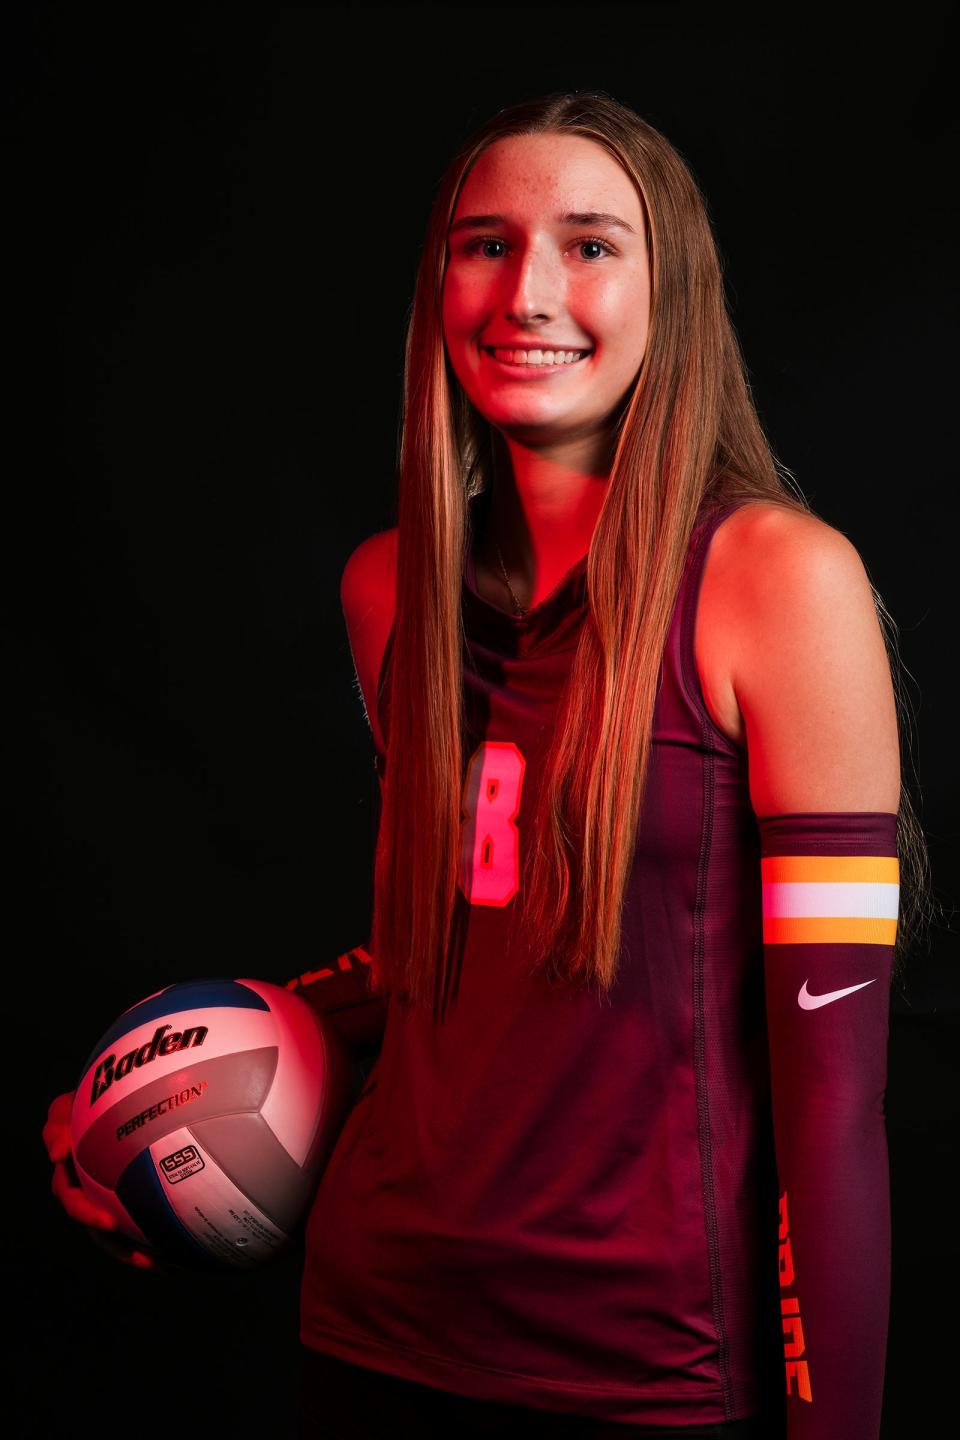 Sydney Lund was only a freshman when she helped Dripping Springs win last year's Class 6A state volleyball championship. She started to play competitively when she was 8 and plans to continue playing in college.